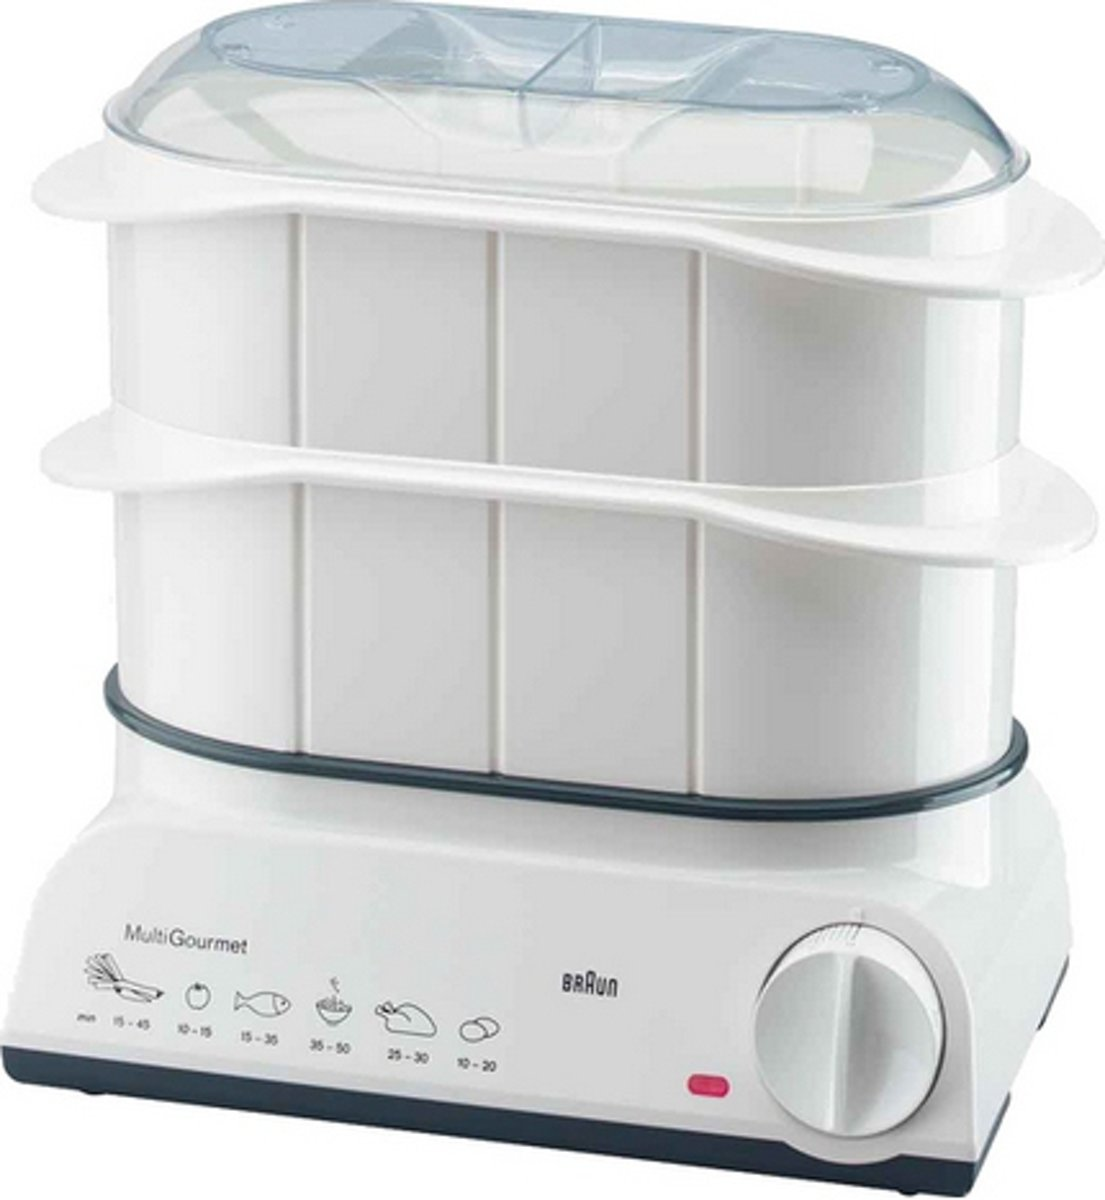 The ***Braun* *MultiGourmet*** food steamer. Although basic, we've used it intensively for 10+ years.